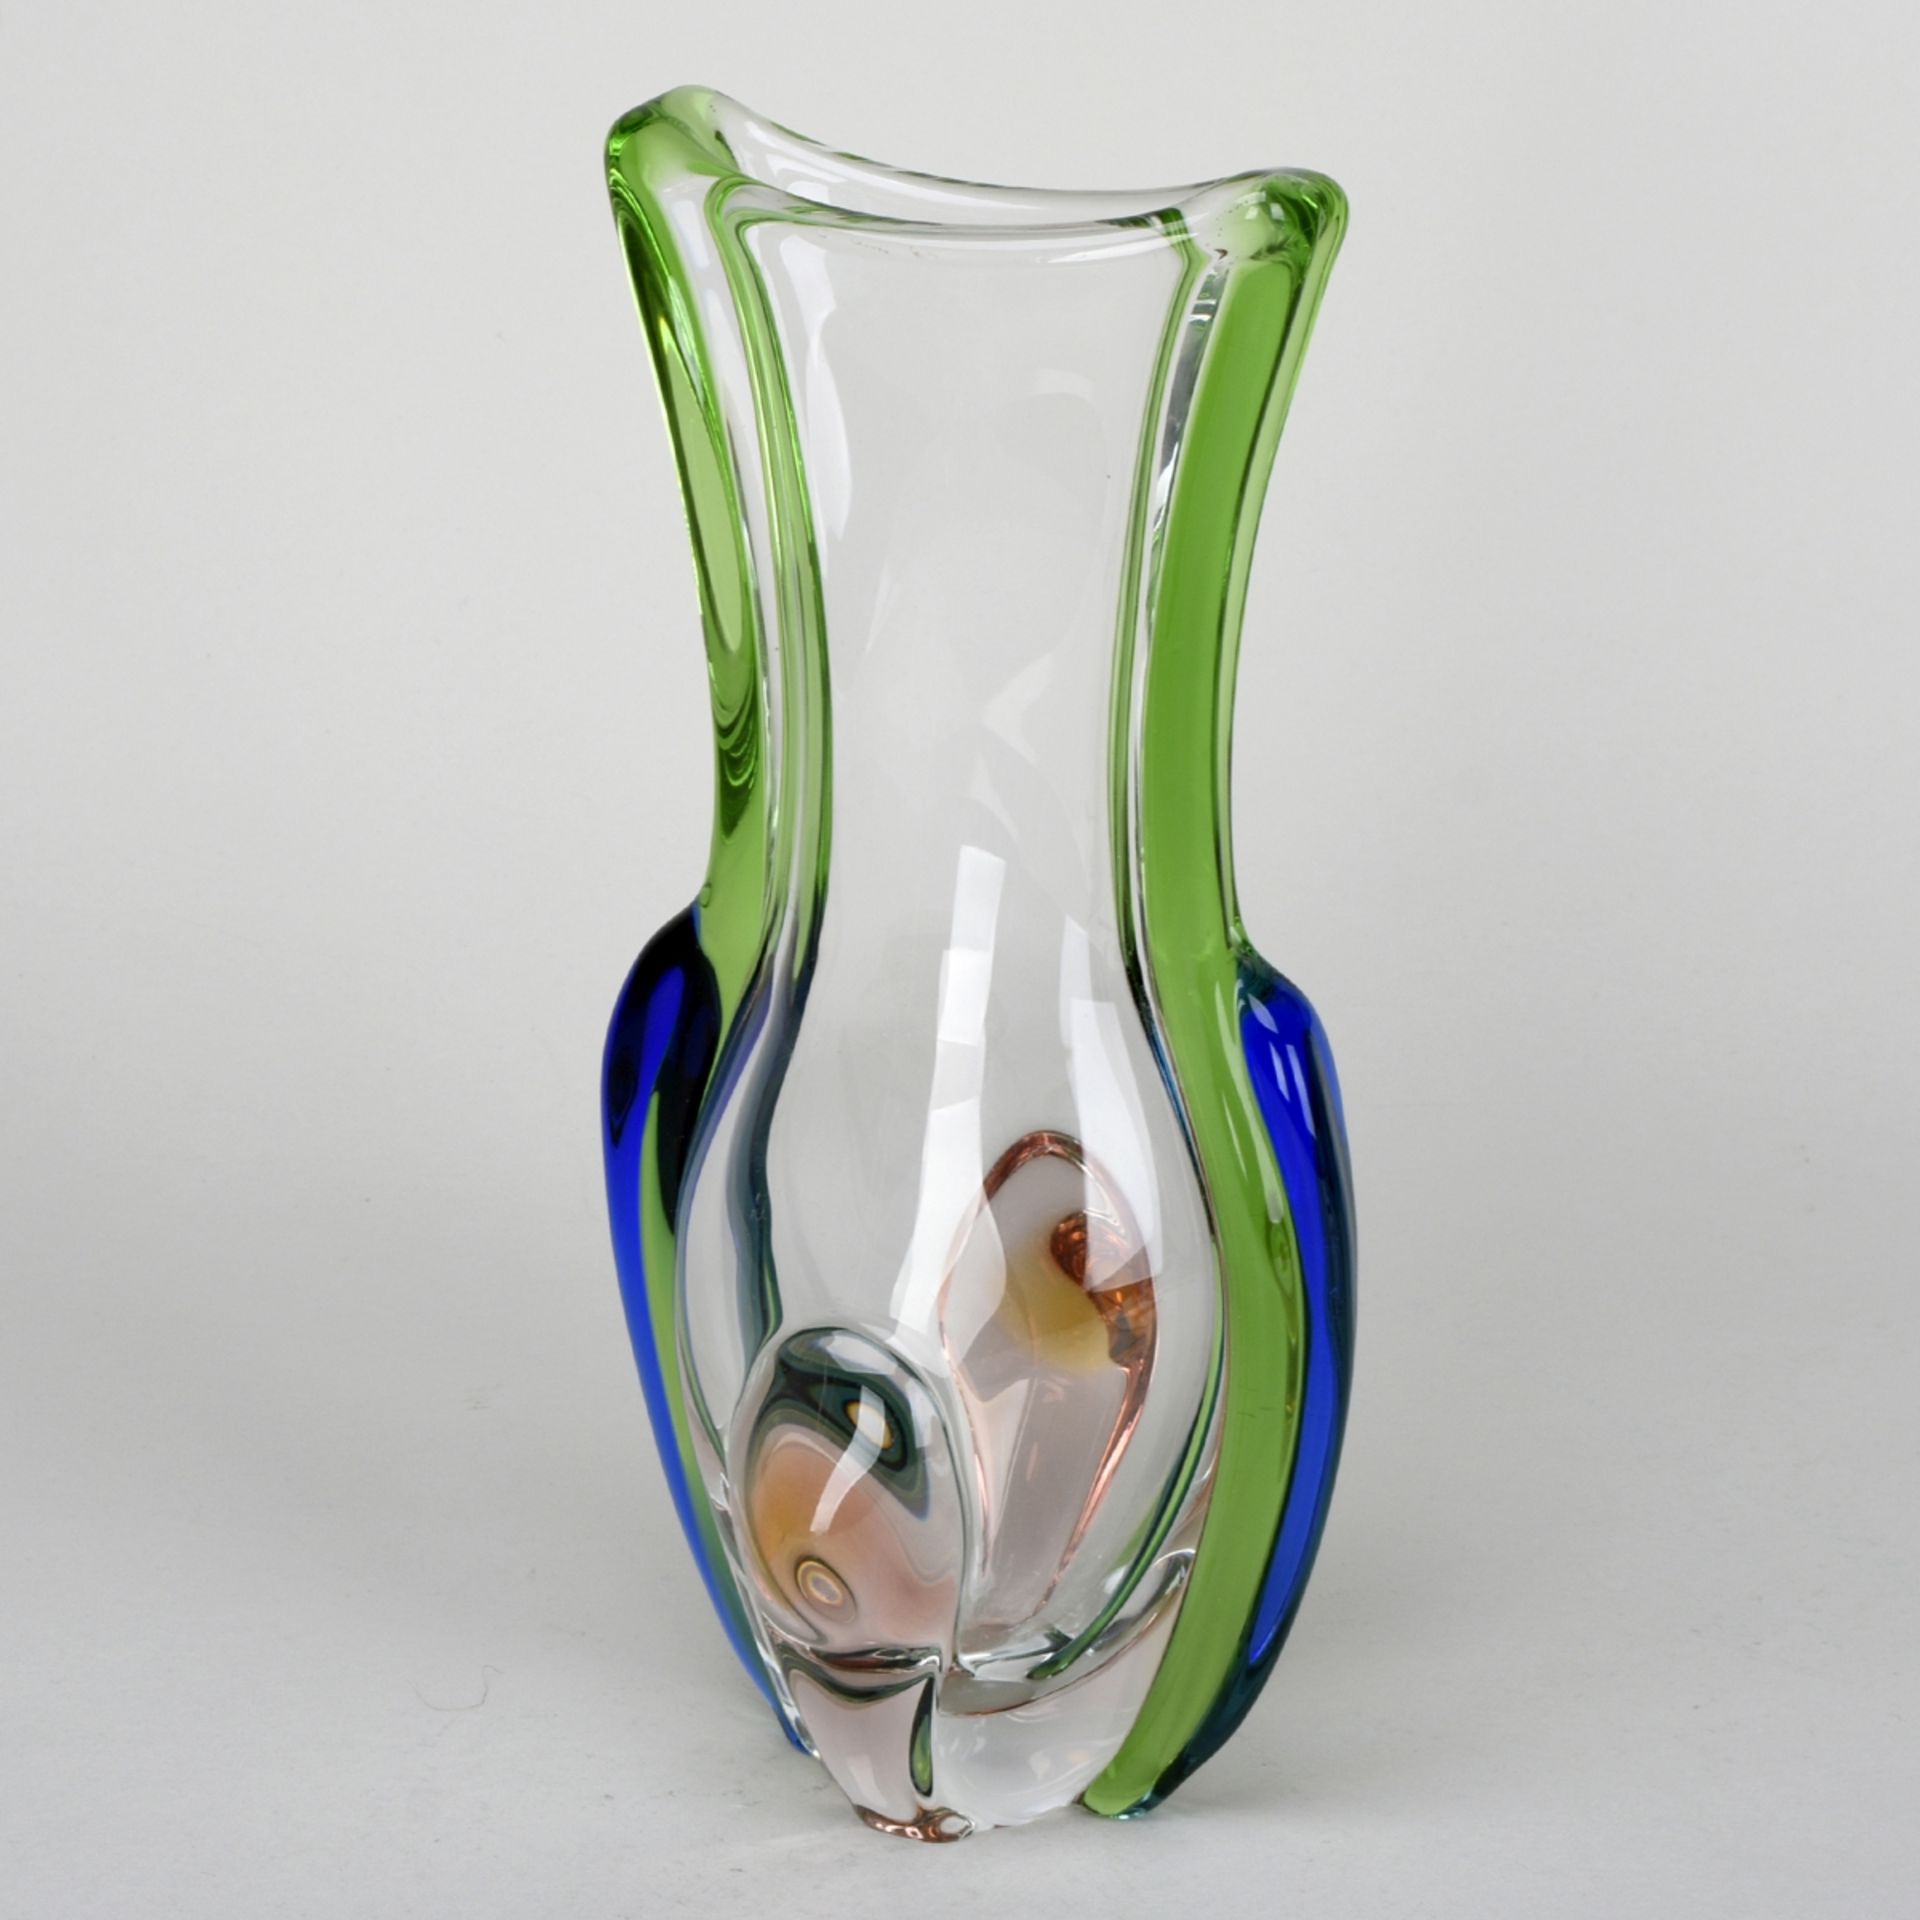 Murano Vase "Sommerso" - Image 2 of 7